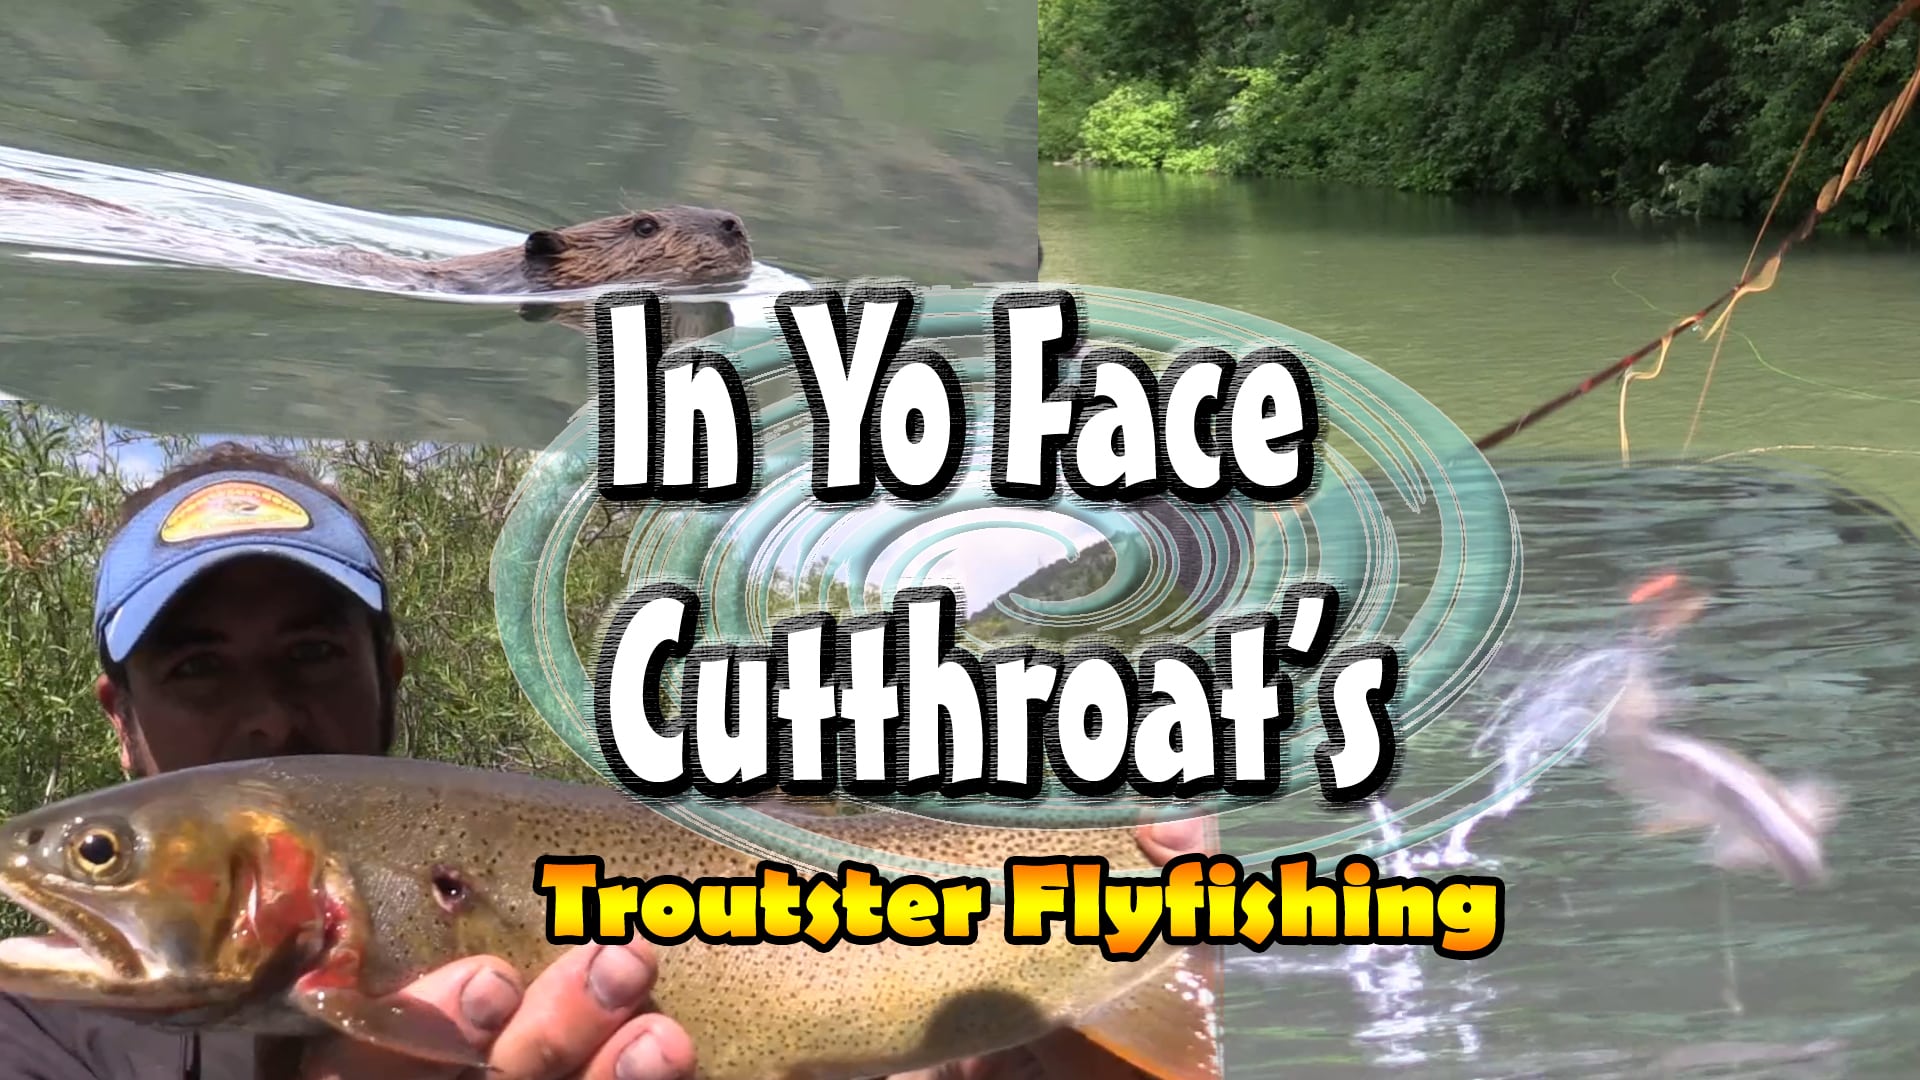 Cutthroat trout on dry flies up close video